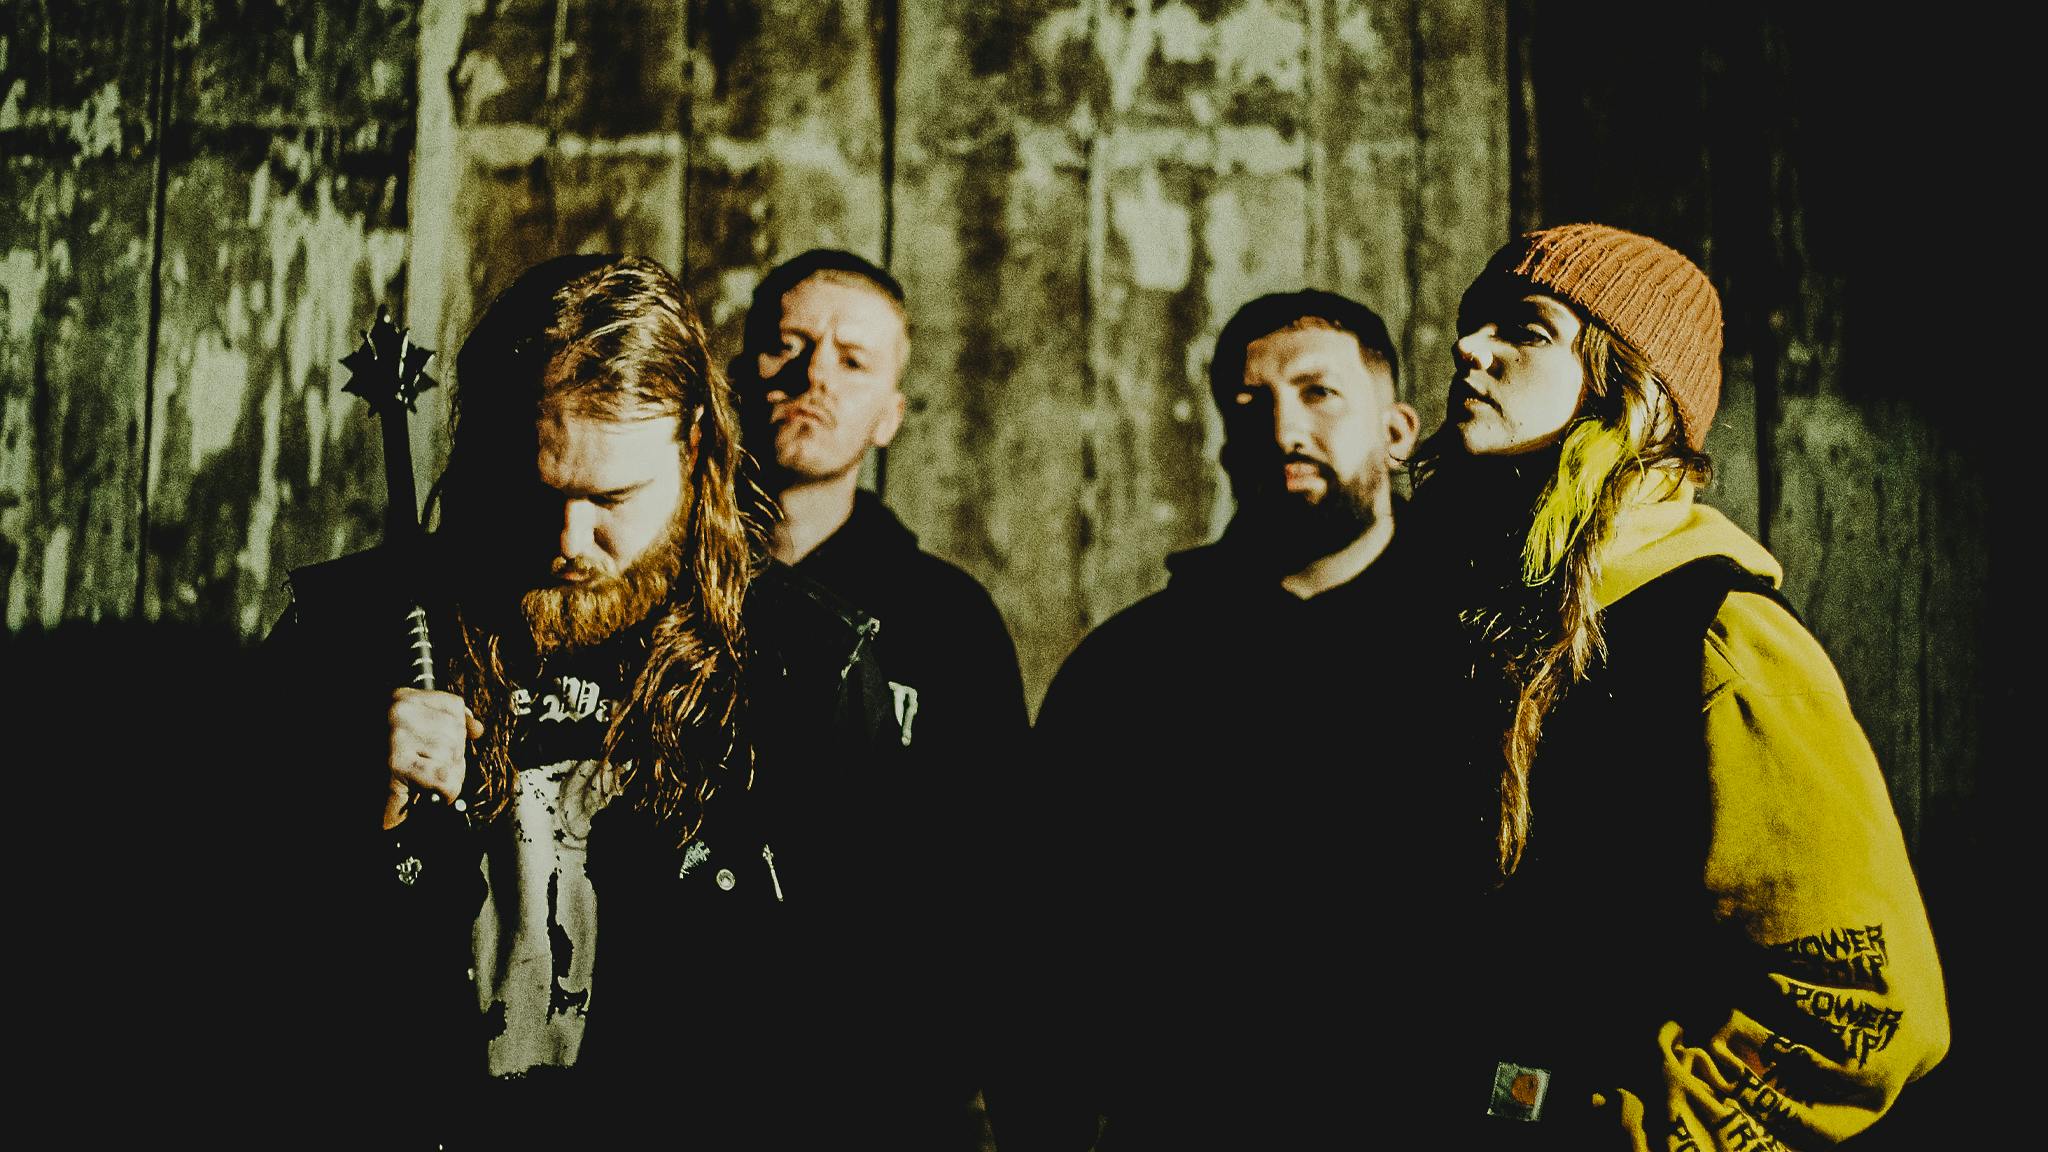 Listen to Heriot’s “visceral yet atmospheric” new single, Siege Lord